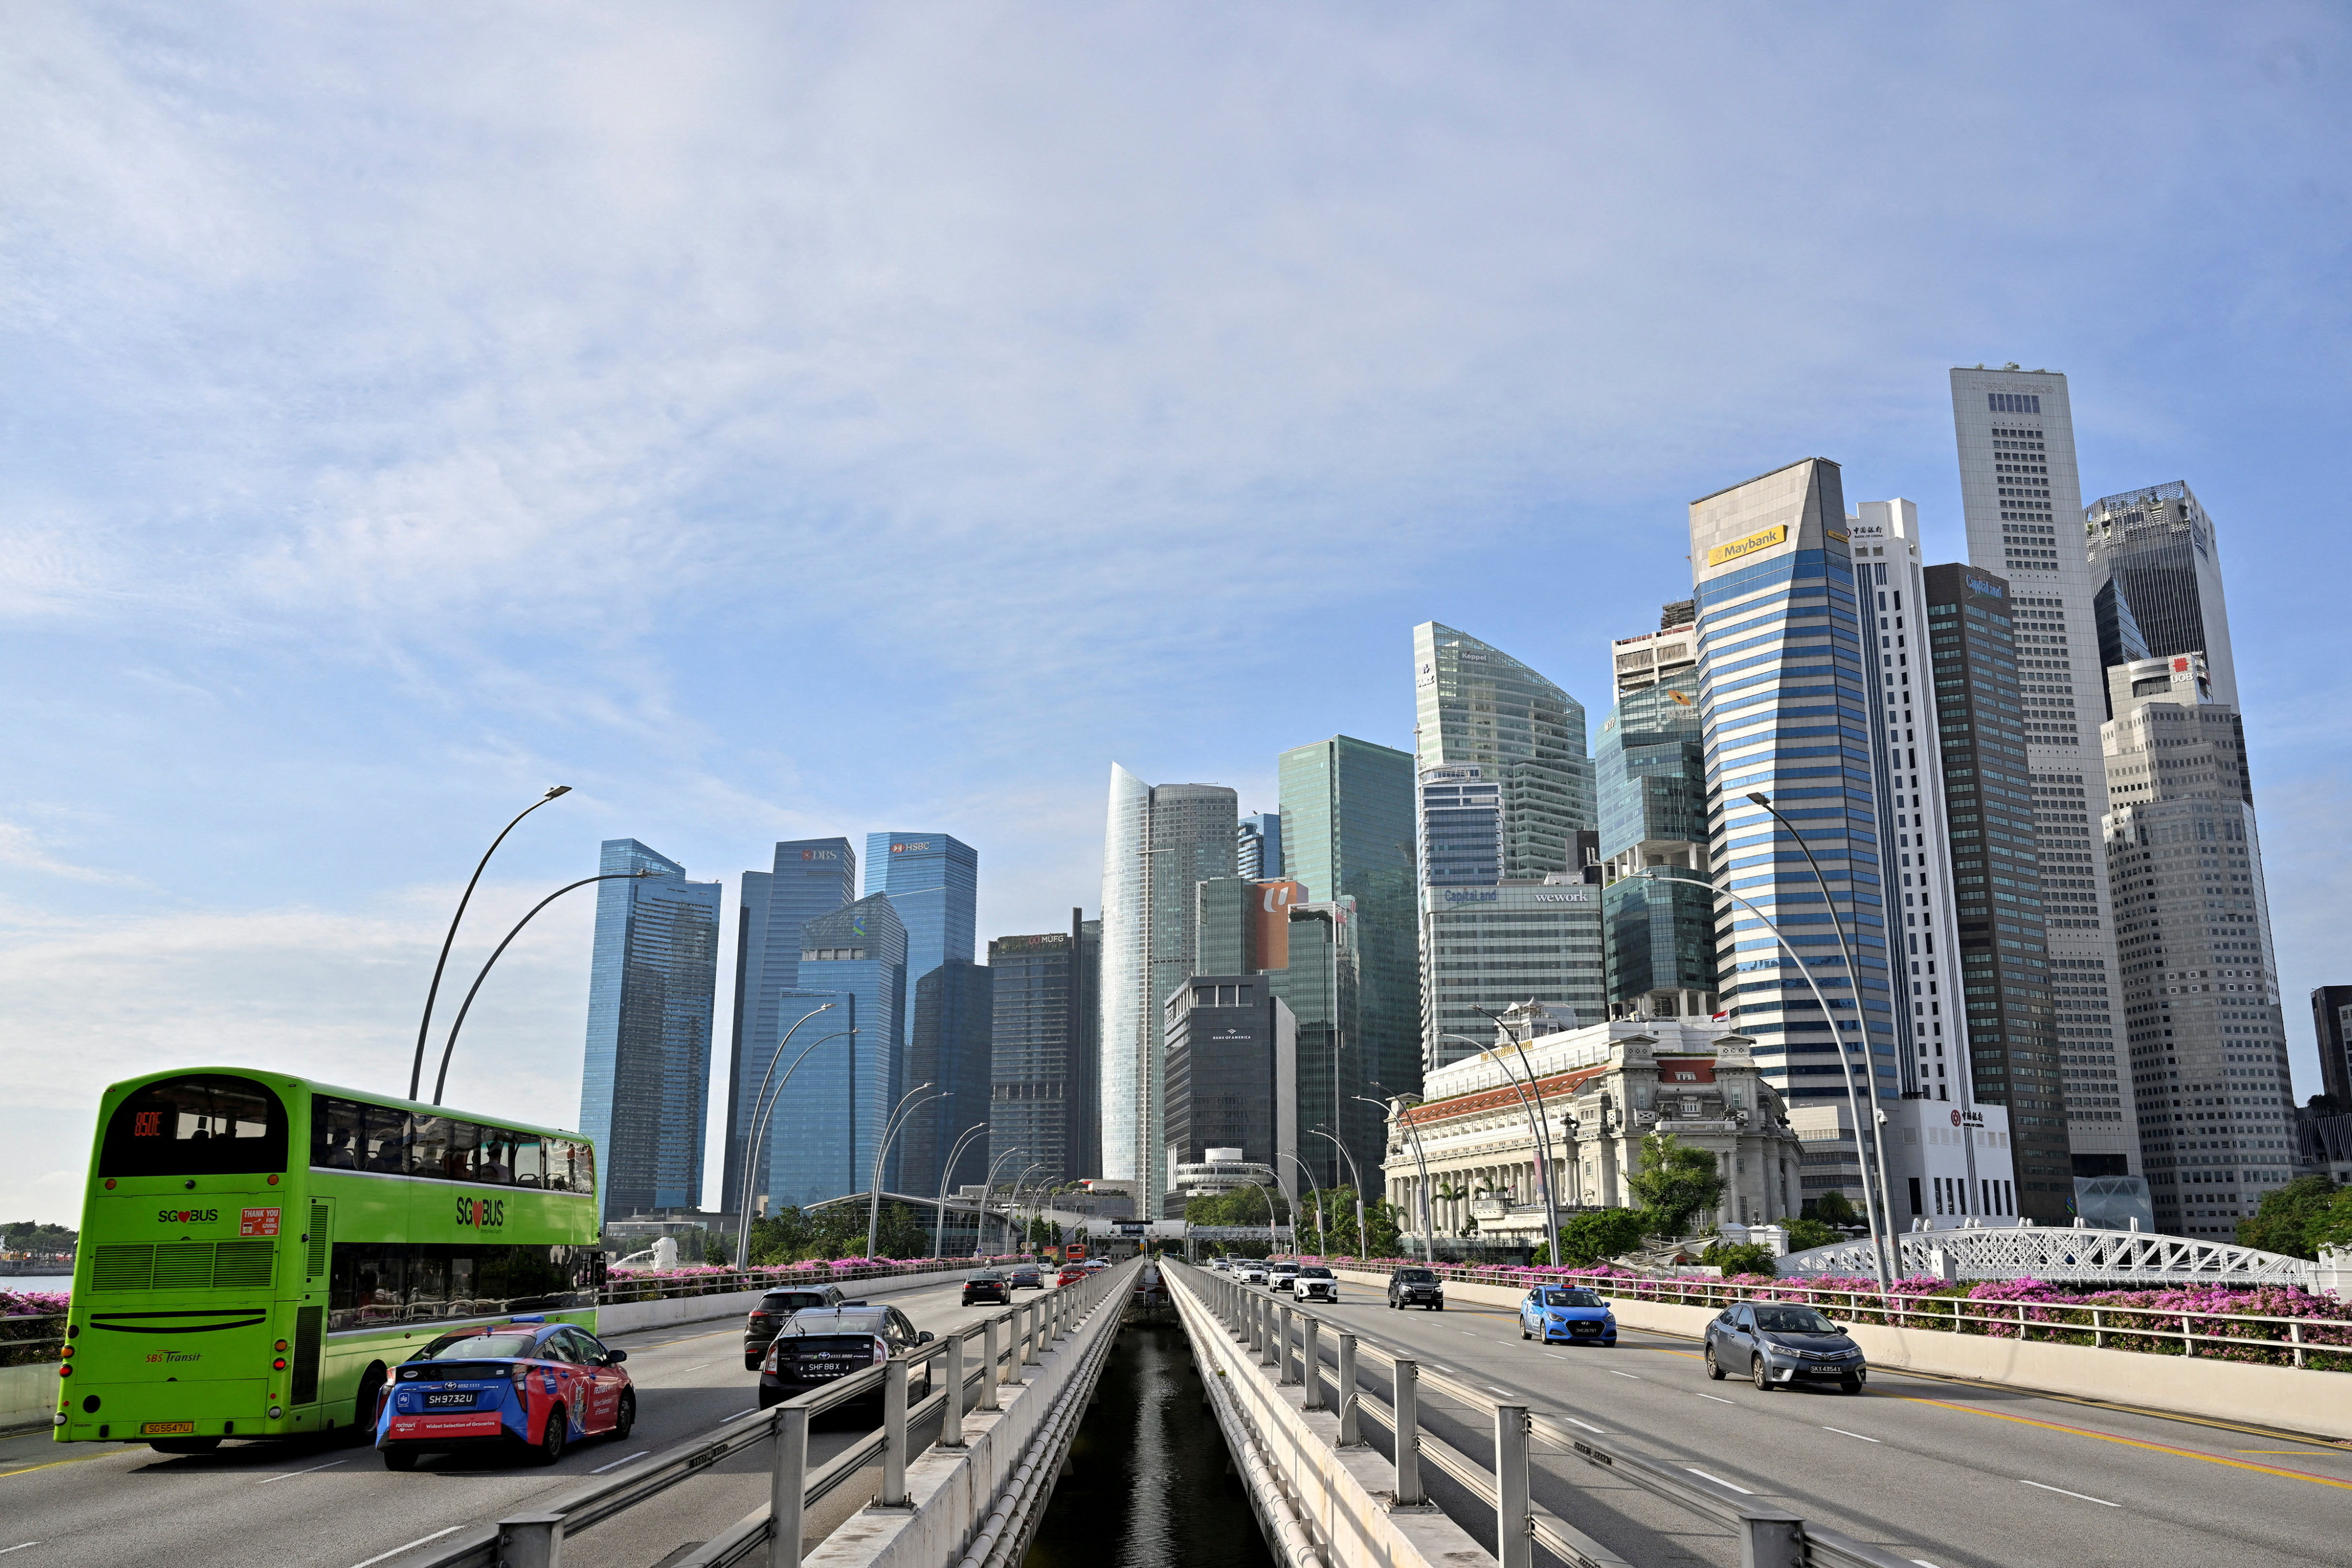 Singapore’s Transport Minister said the adoption of a new payment platform for public transport was a “judgment error”. Photo: Reuters